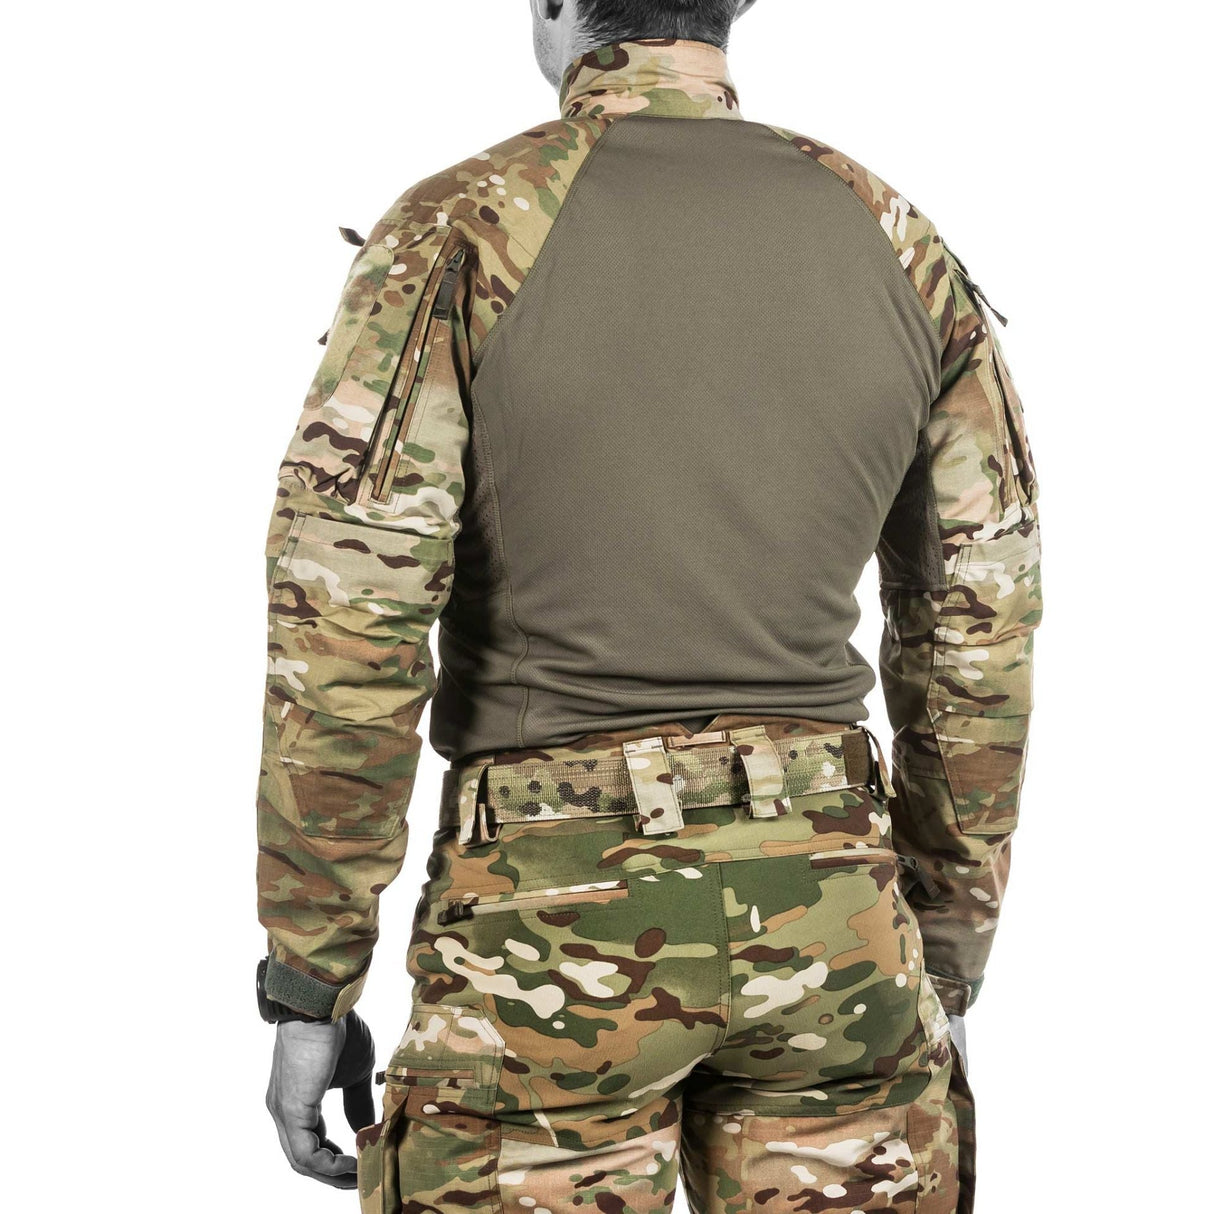 Tactical Shirt: Reliable elbow protection, ventilation zippers, customizable fit.